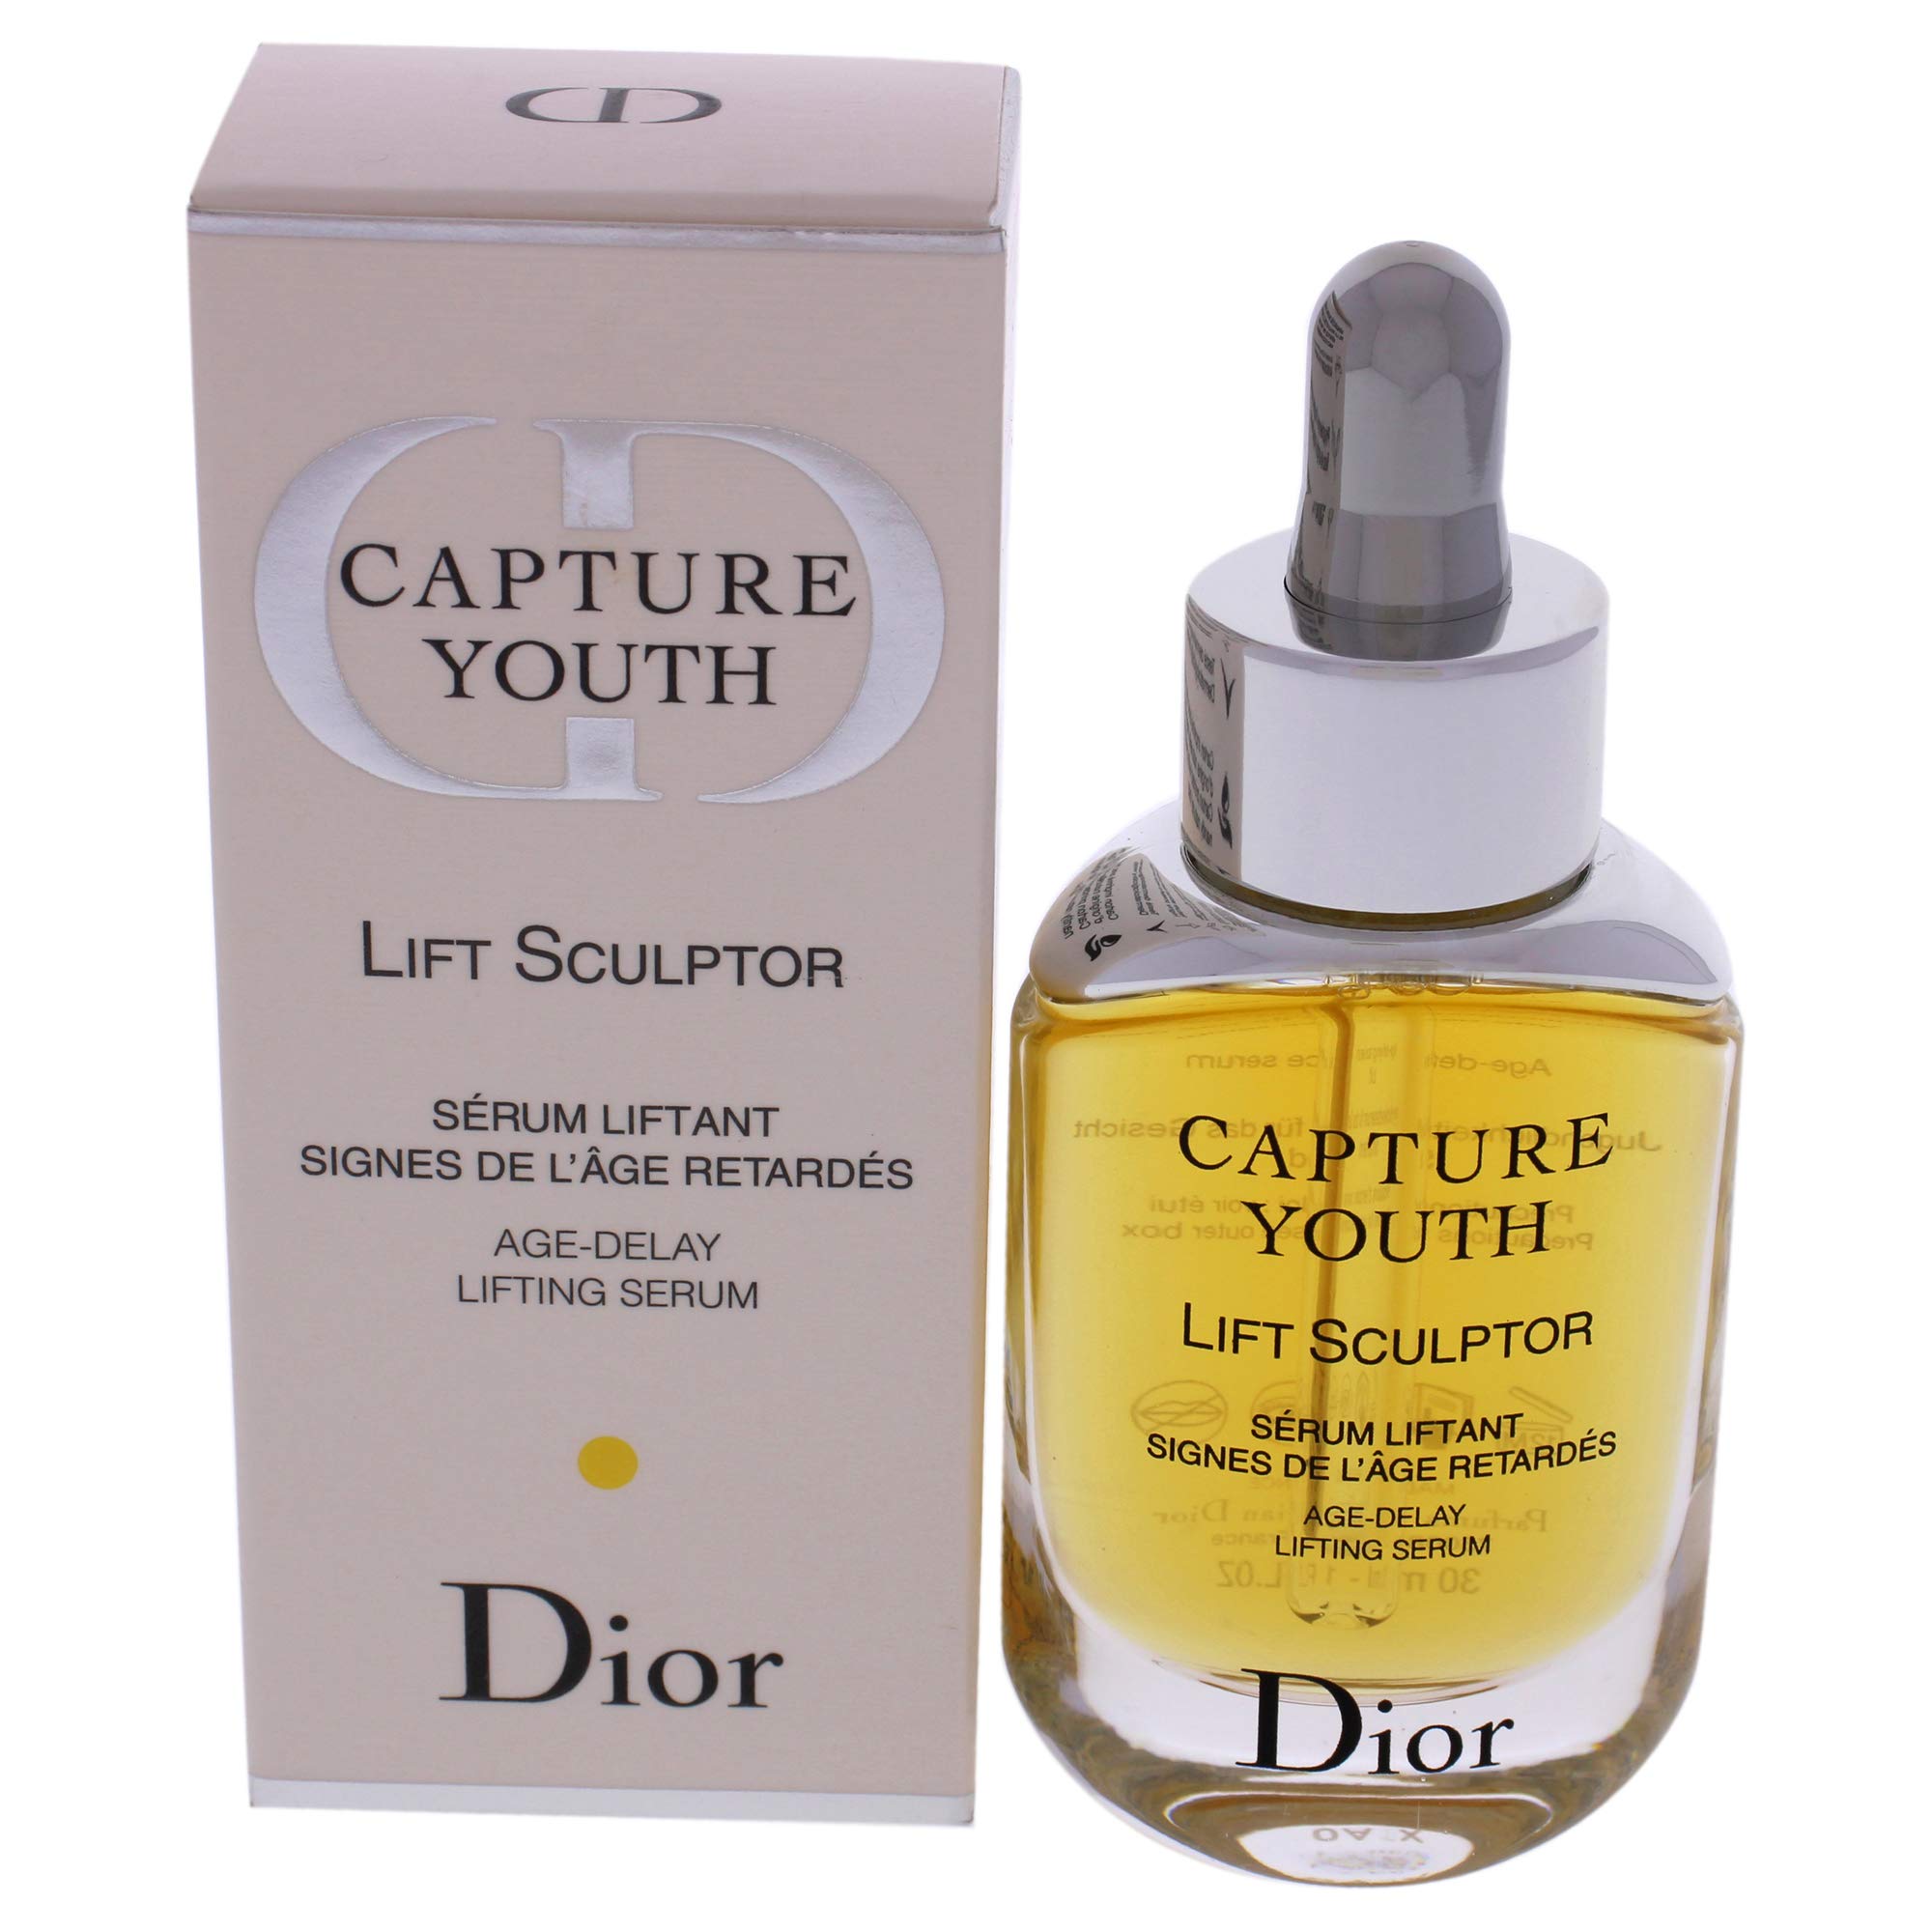 SERUM DIOR CAPTURE YOUTH INTENSE RESCUE  TESTER  30ML   Thelook17